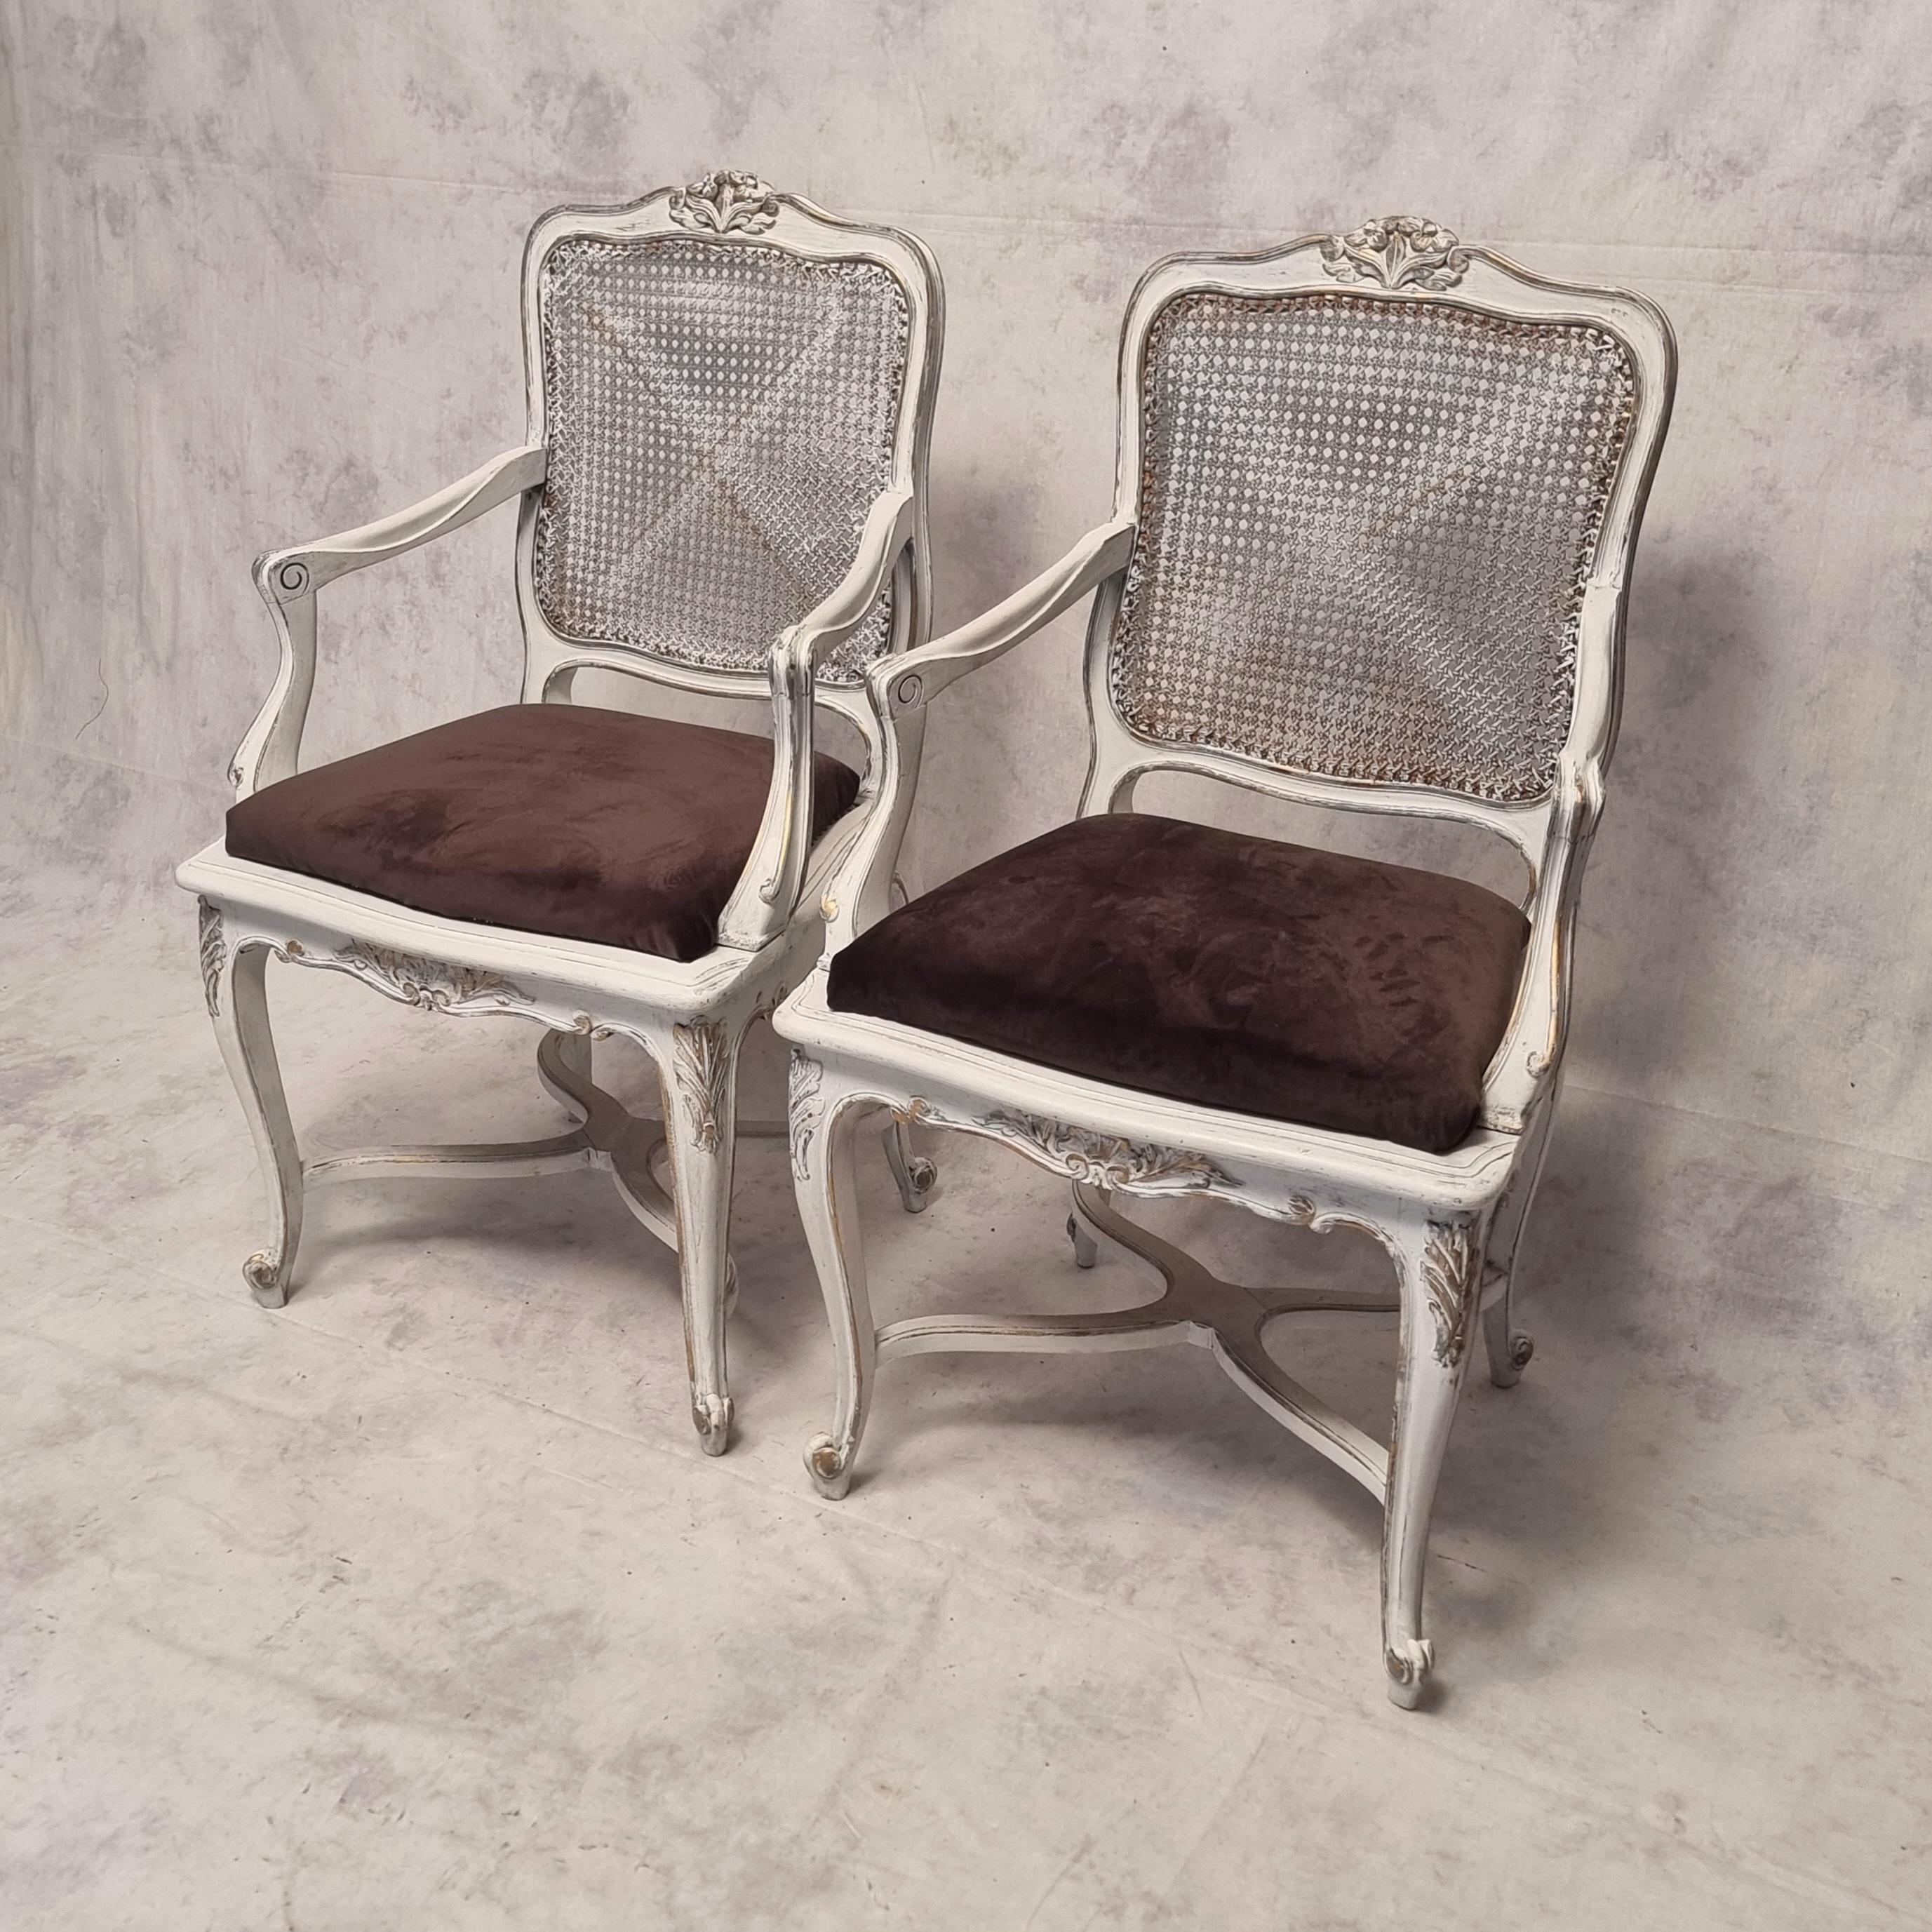 French Pair Of Regency Style Cane Armchairs - Painted Wood - 19th For Sale